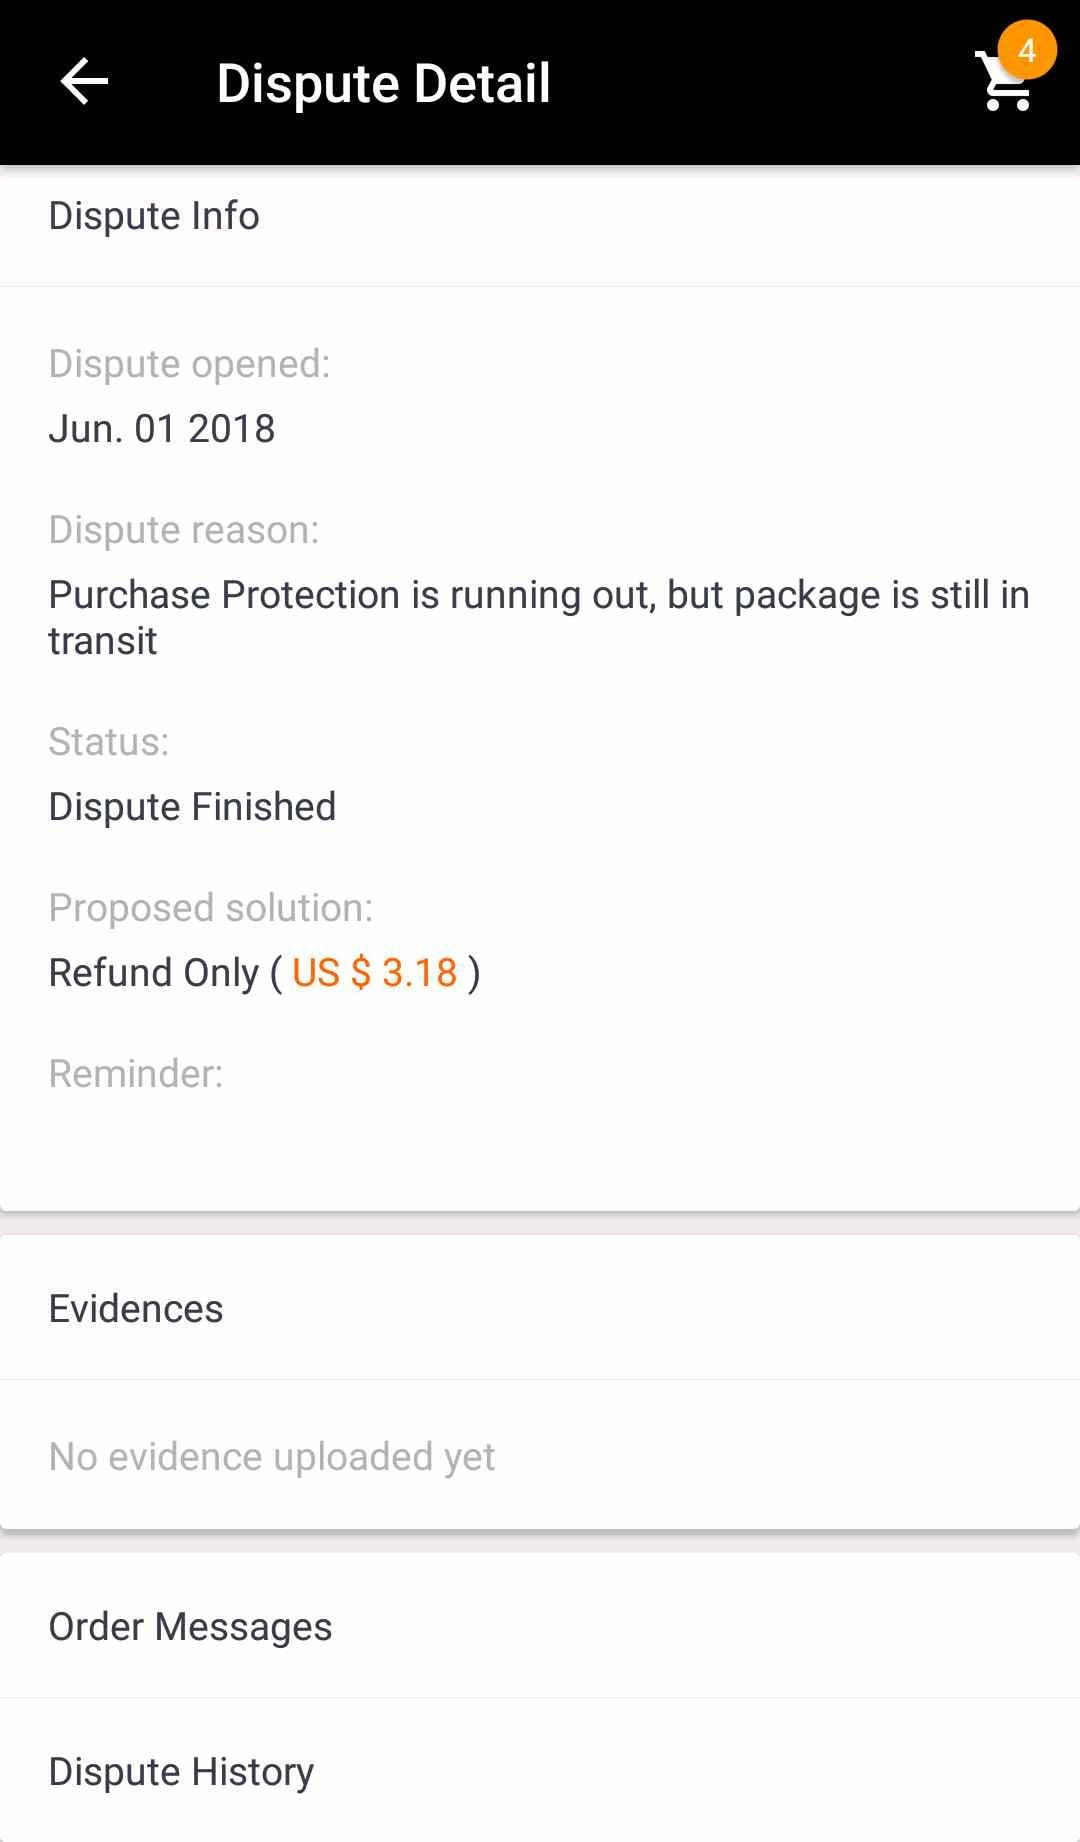 How to buy from Aliexpress and Banggood Safely